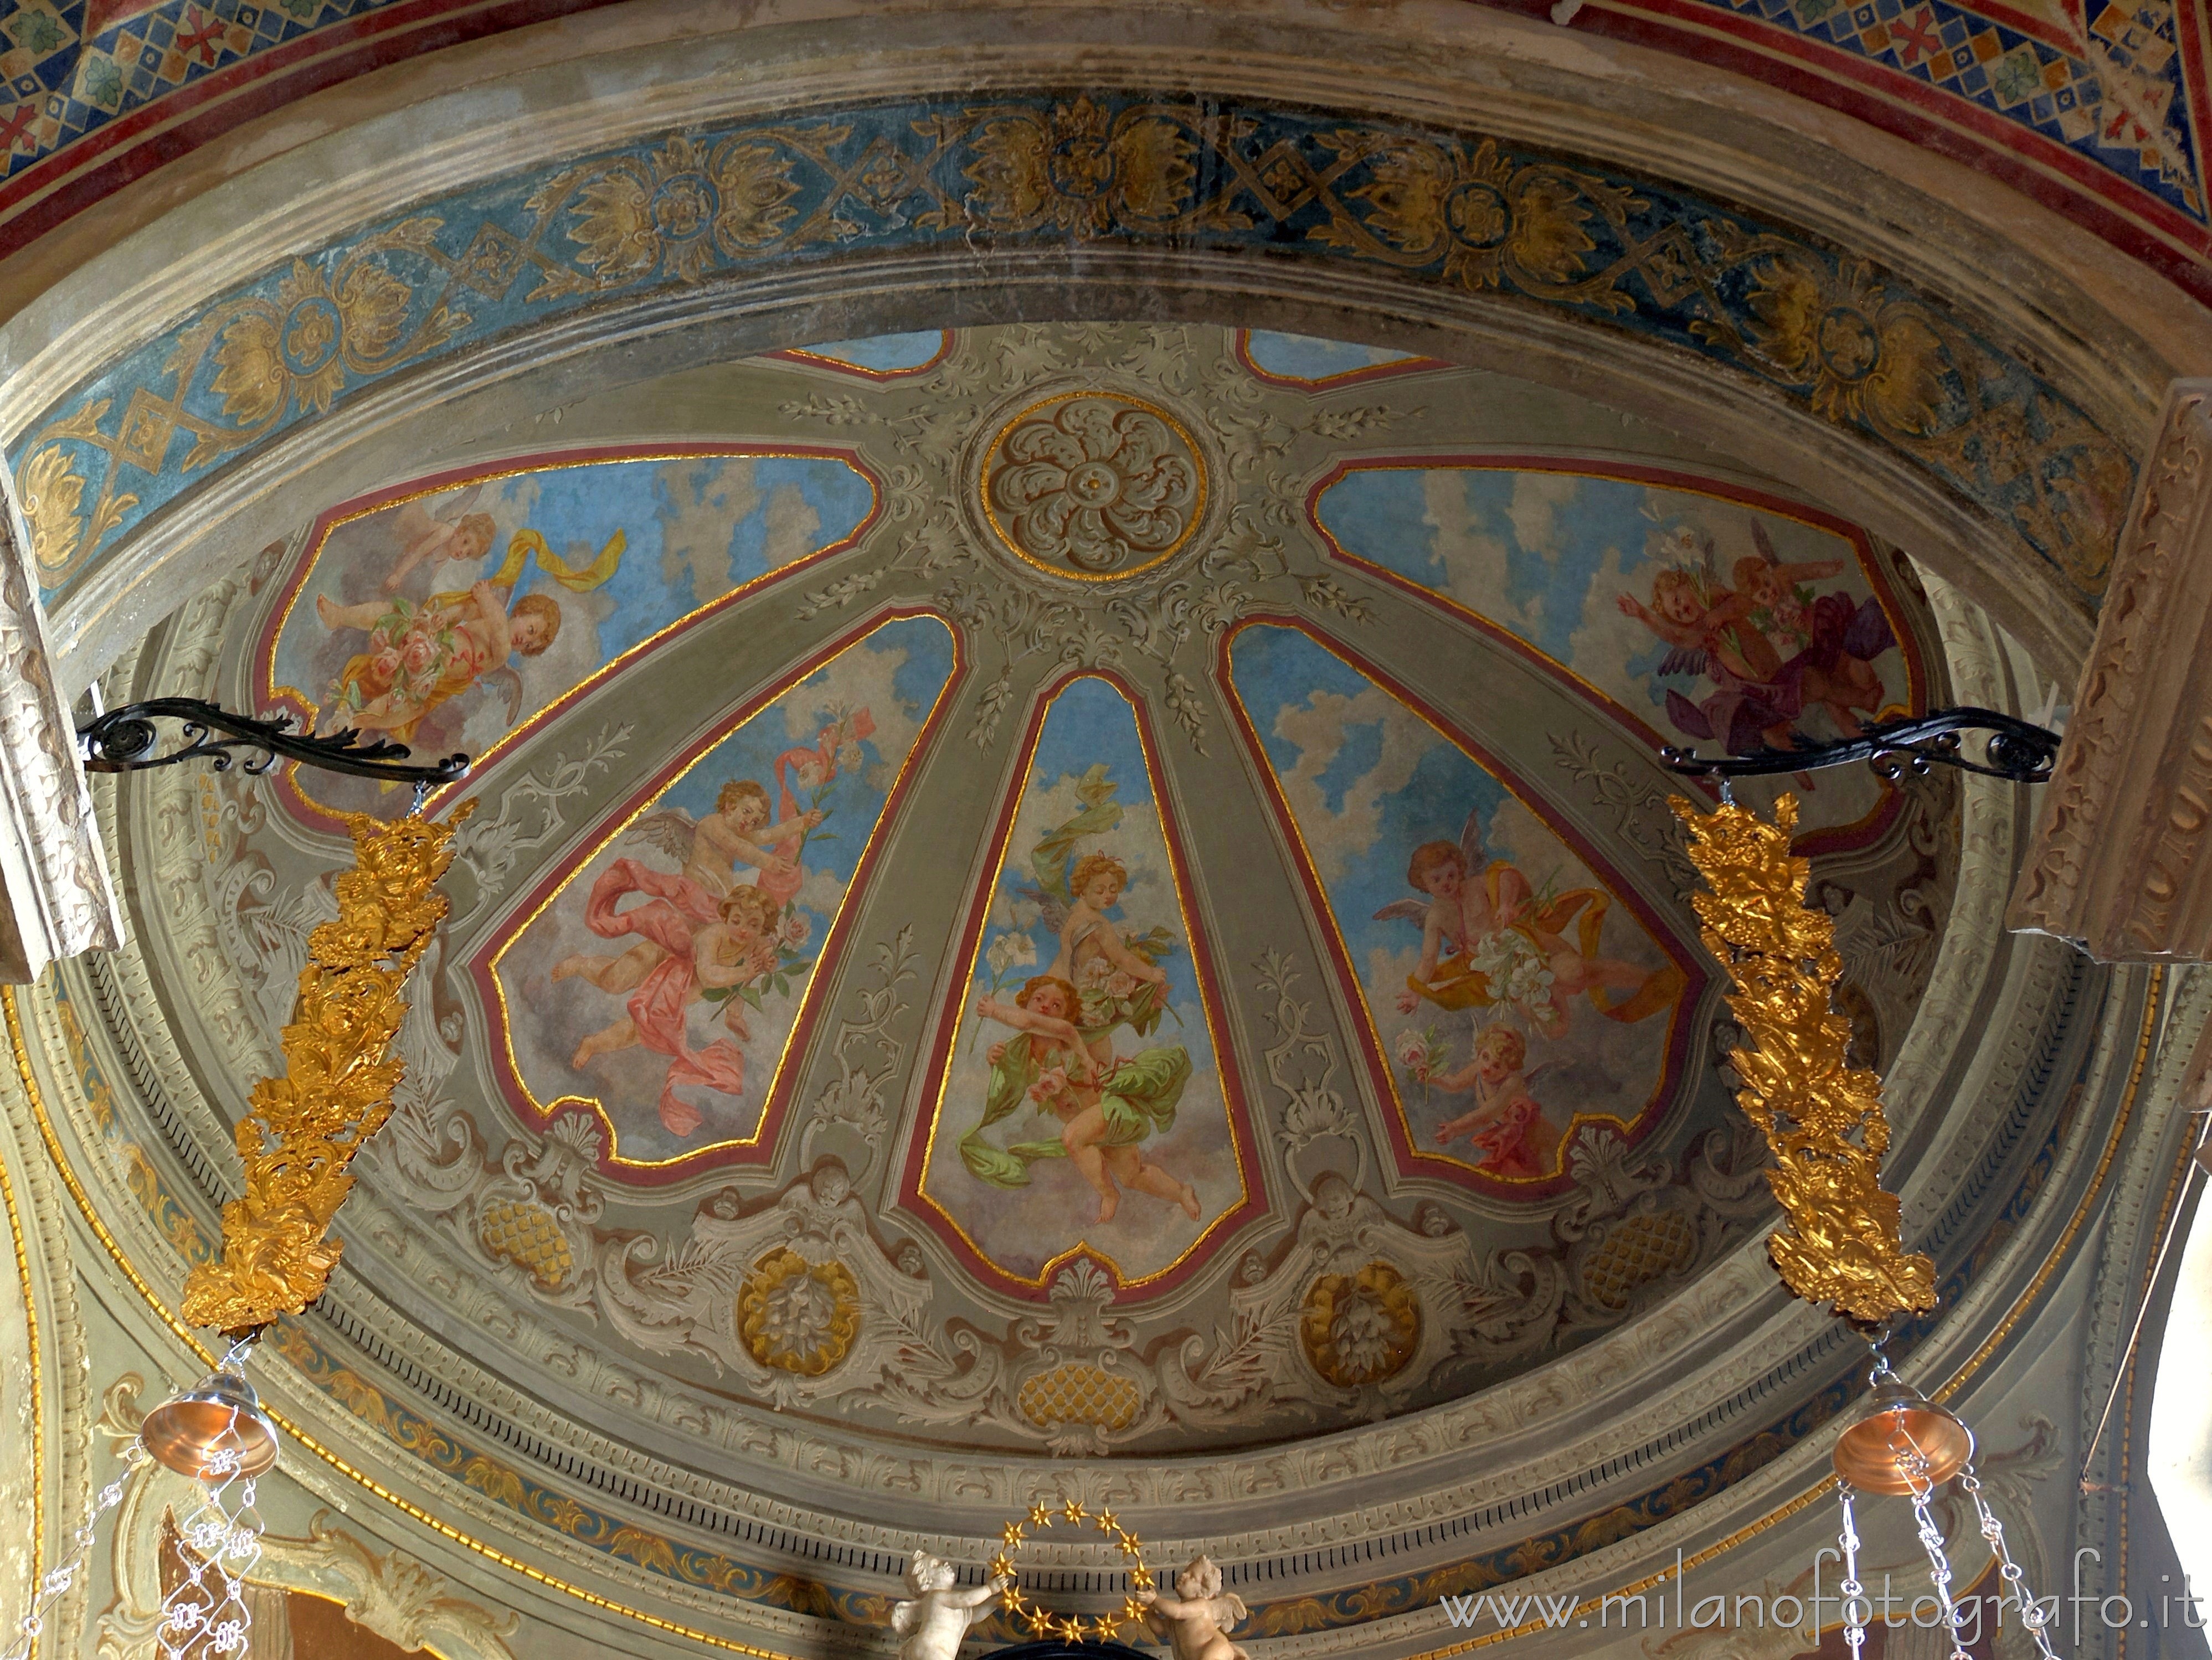 Soncino (Cremona, Italy): Vault of the chapel of the Immaculate Conception in the Pieve of Santa Maria Assunta - Soncino (Cremona, Italy)